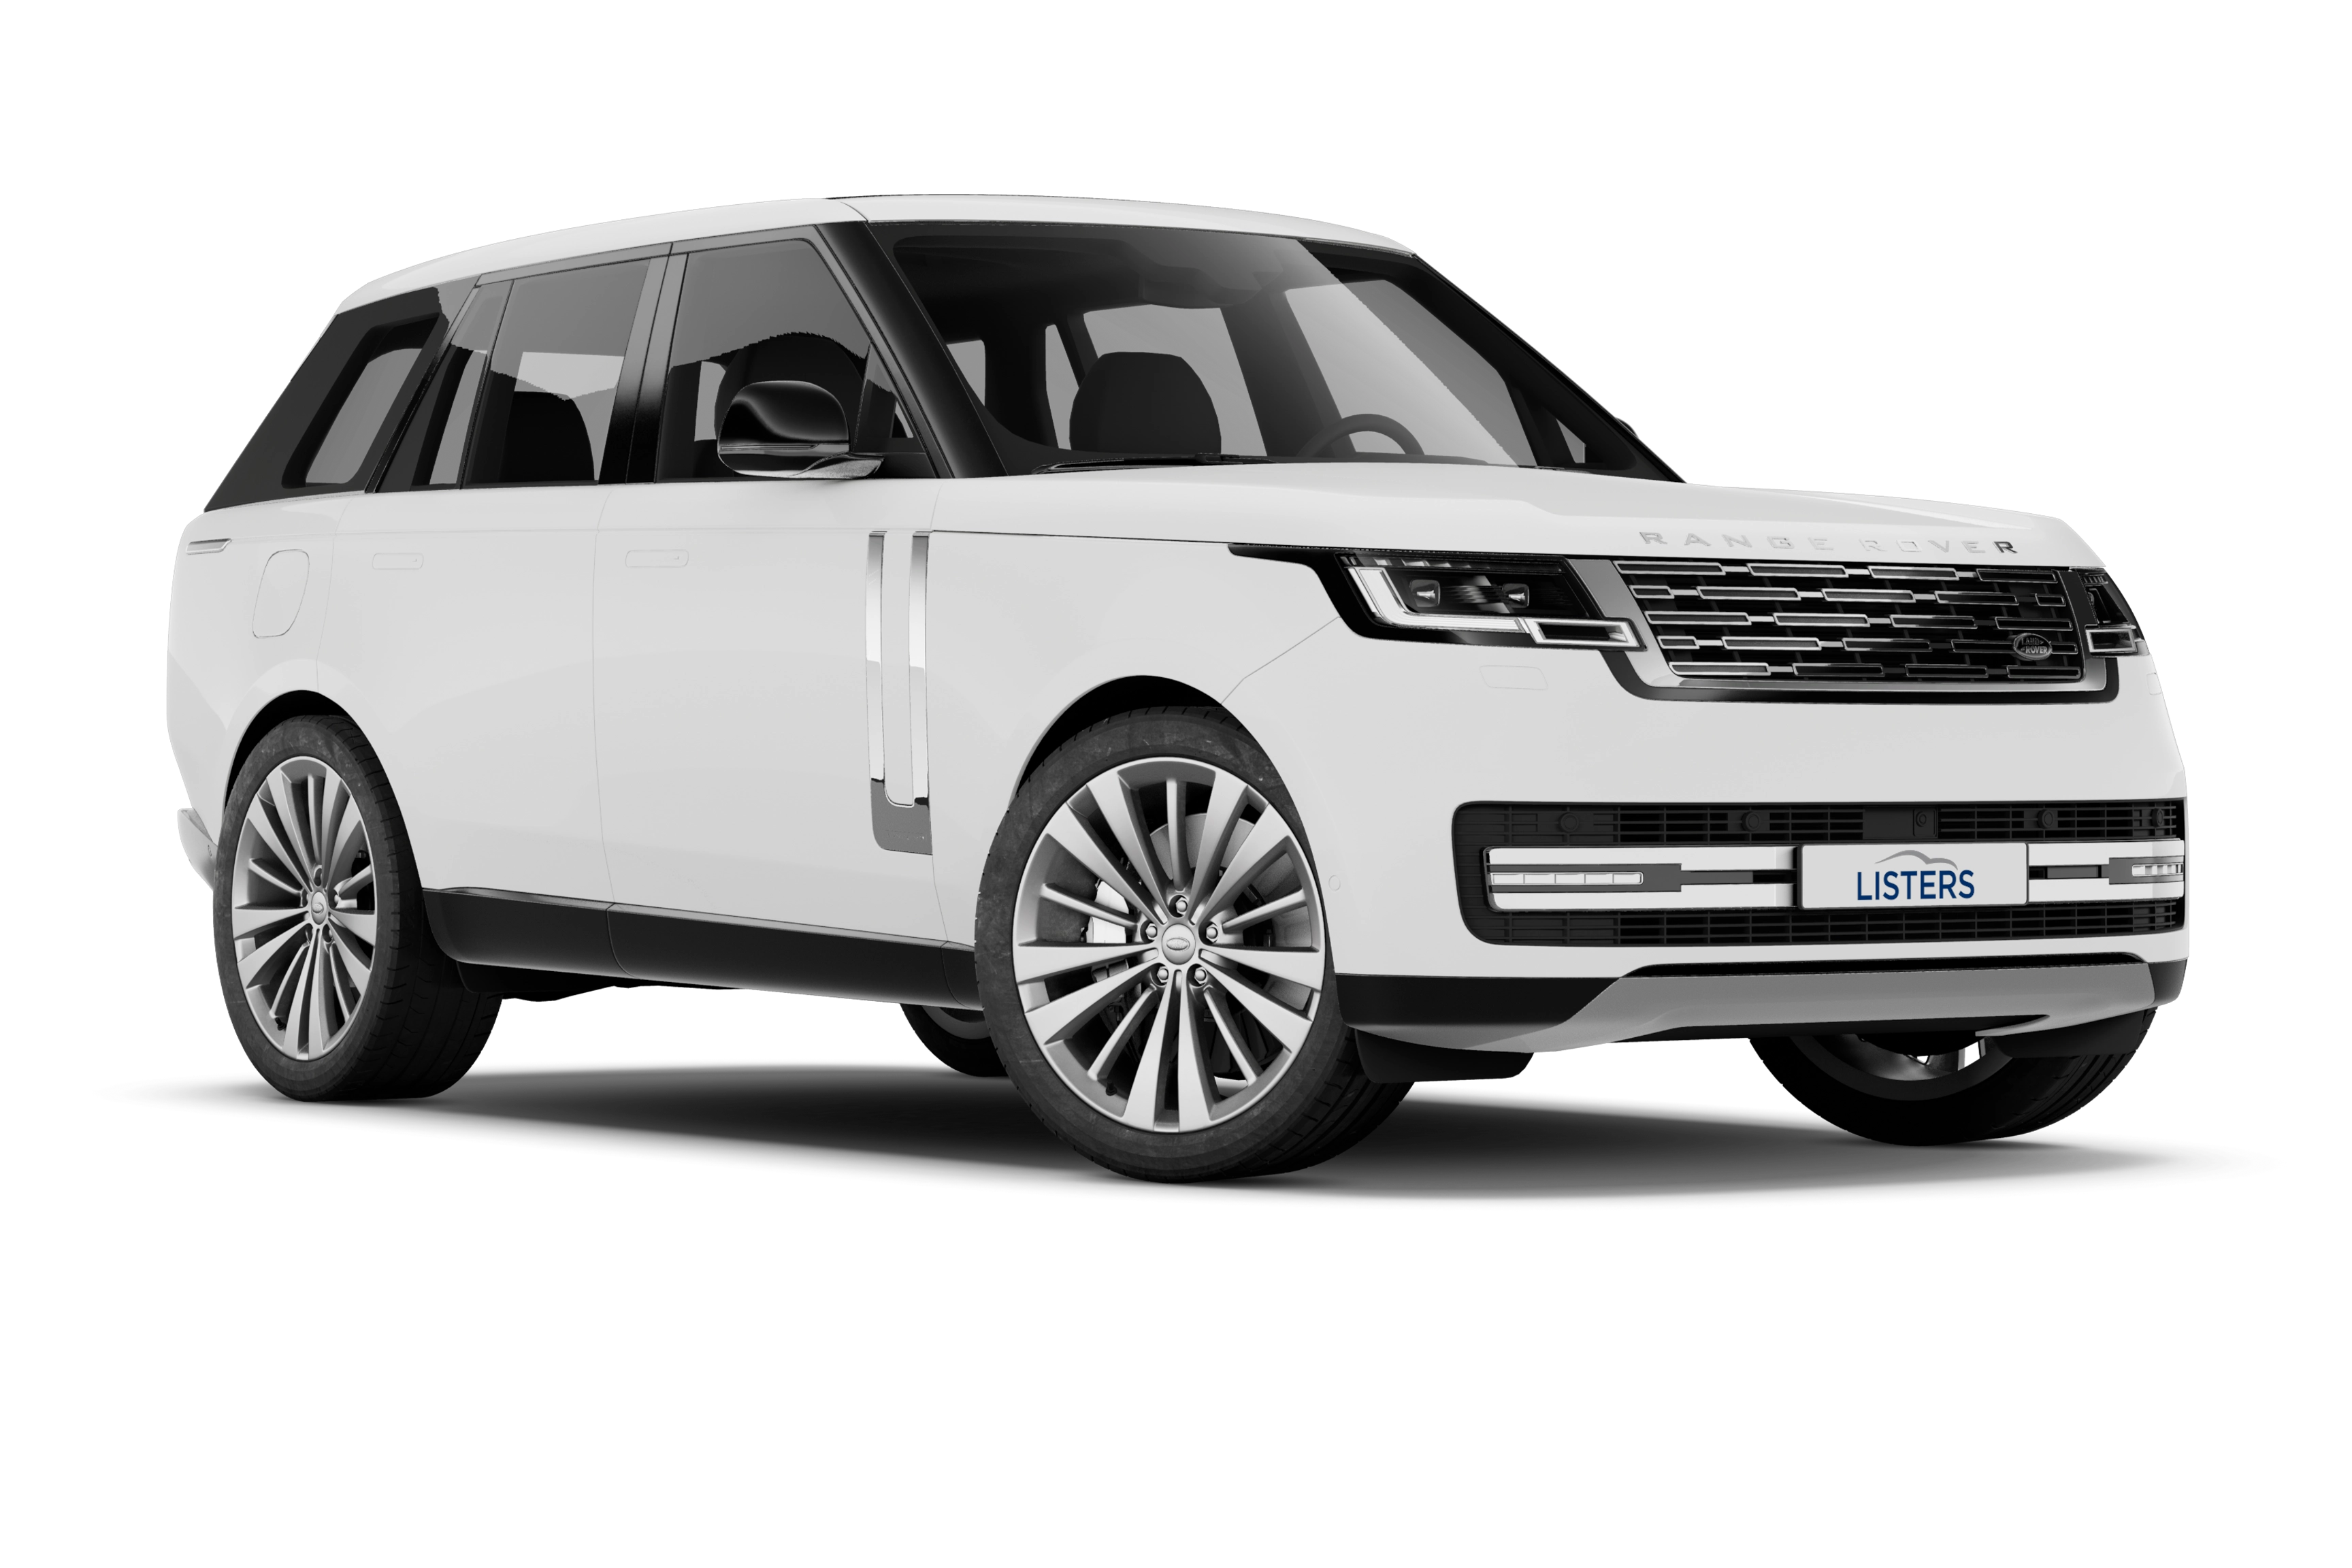 Range Rover Contract Hire & Leasing Offers